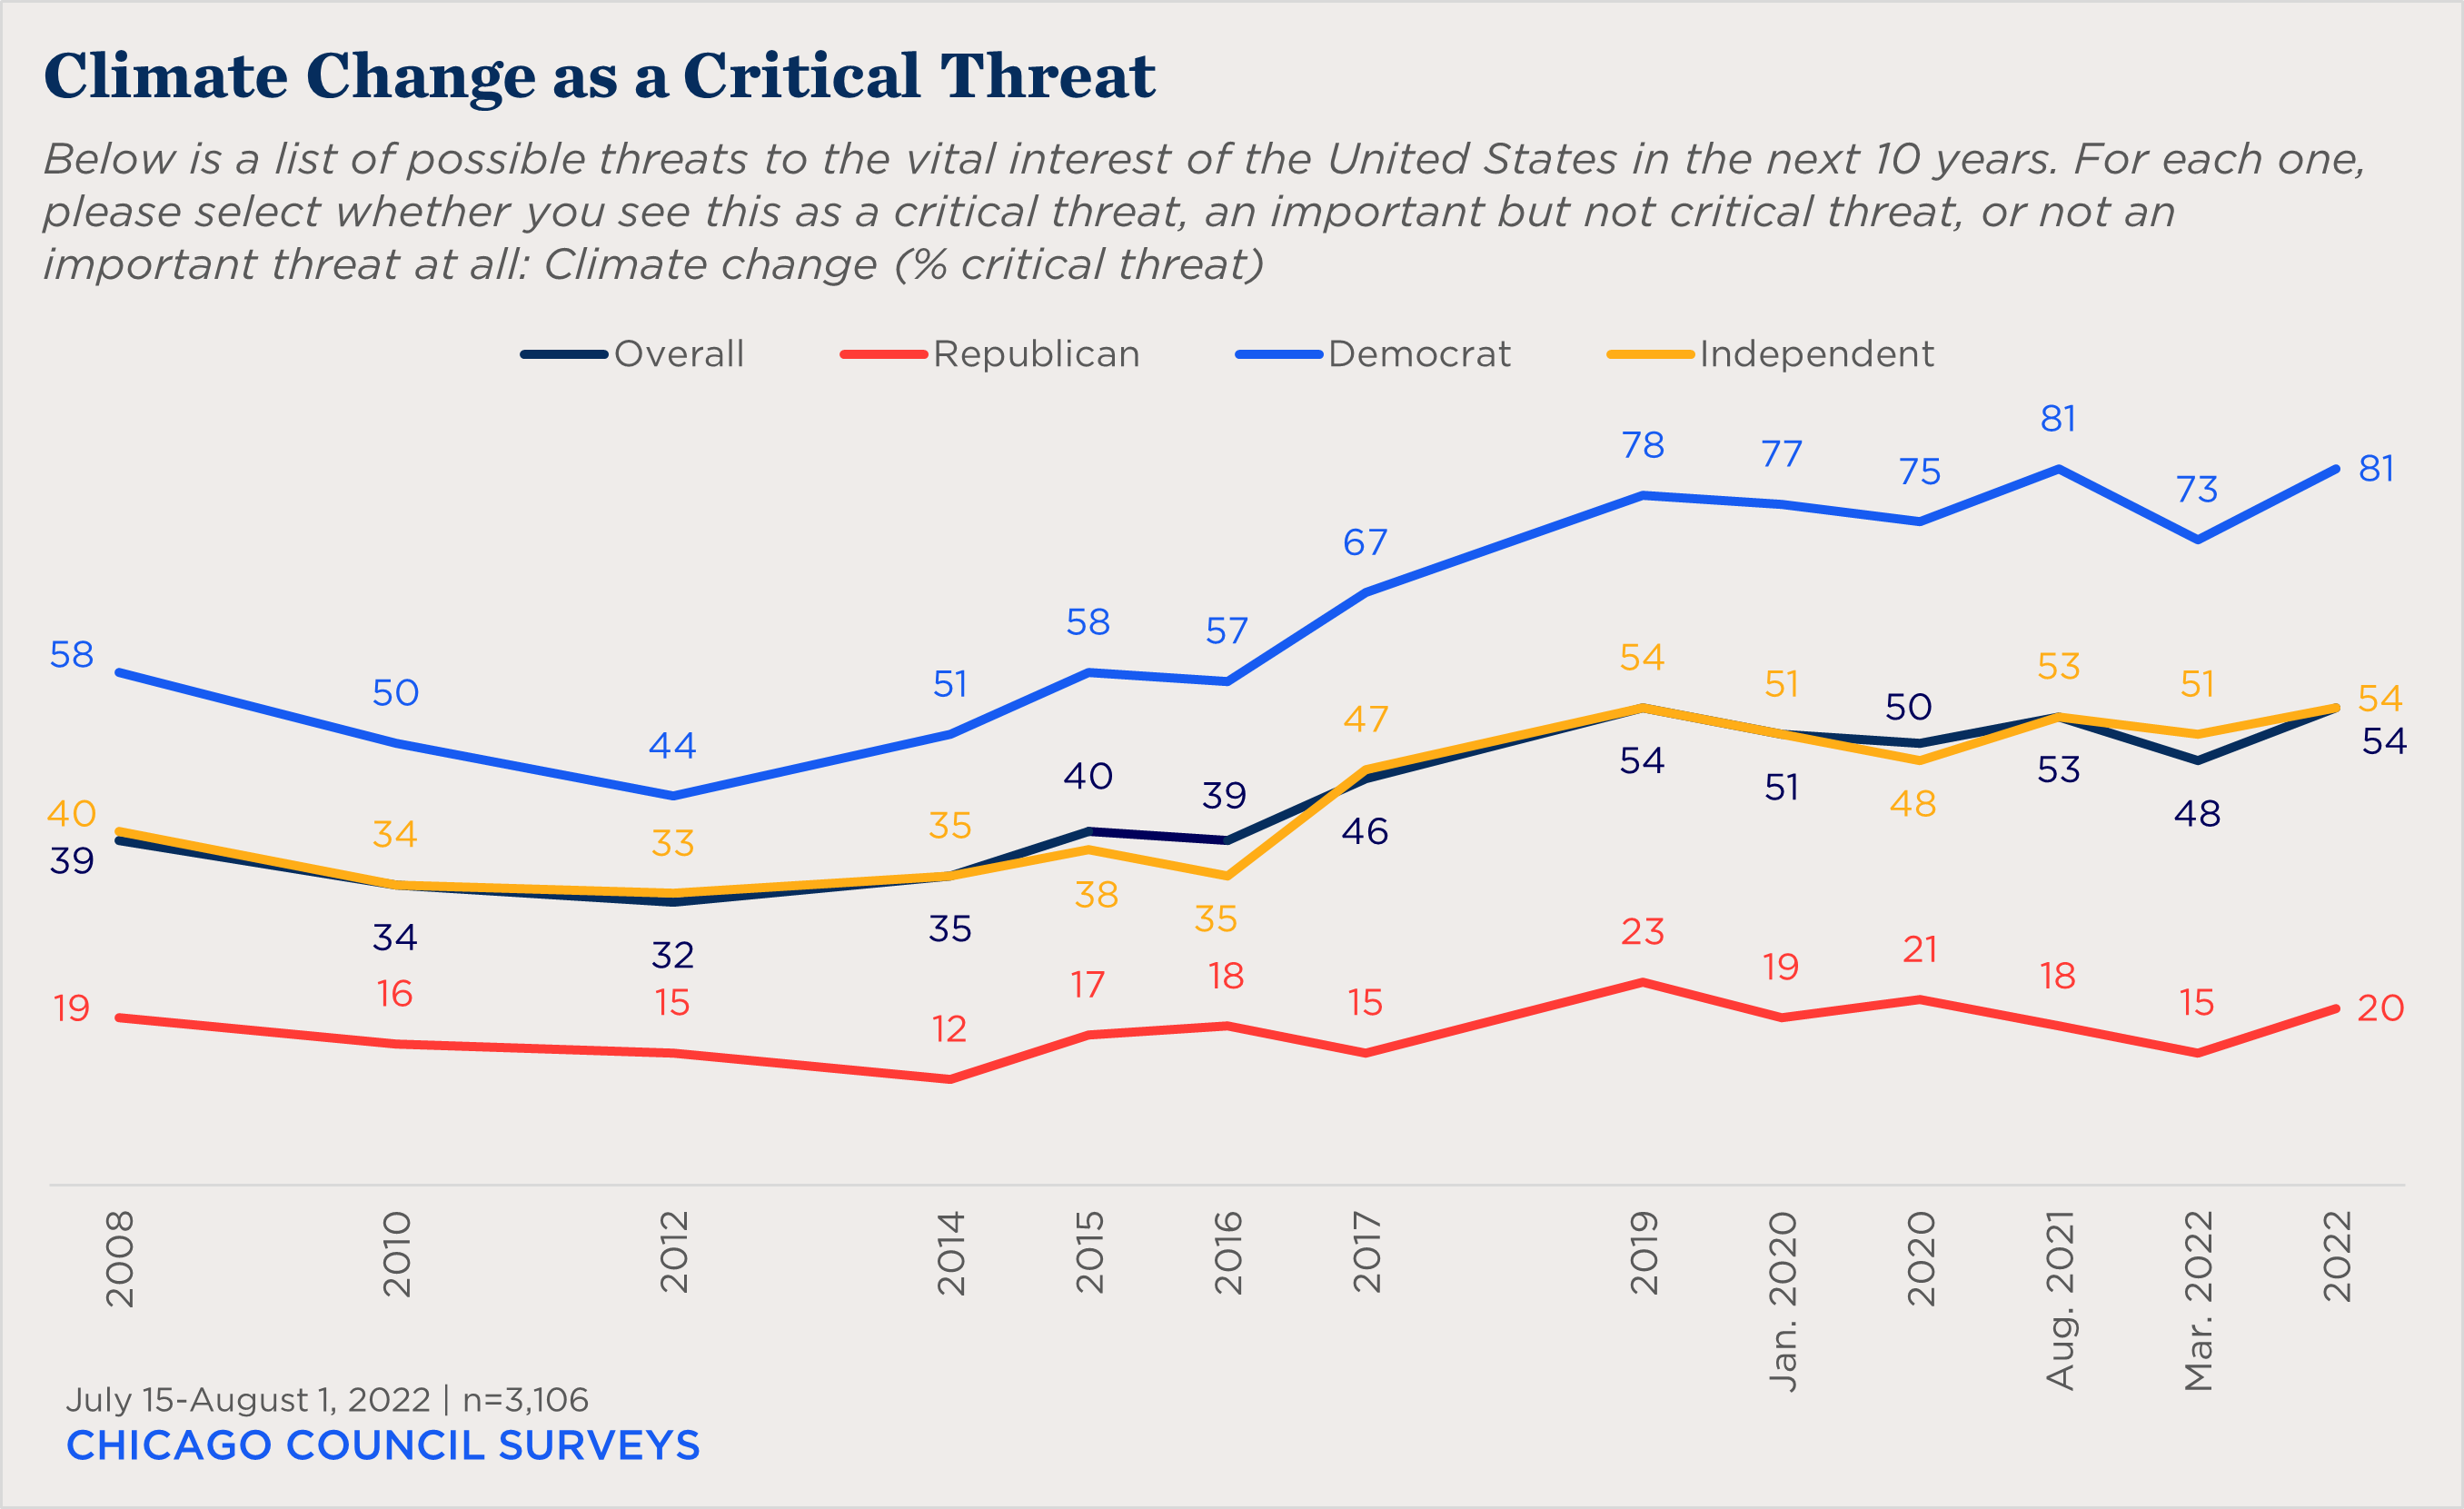 "a line chart showing partisan views of climate change as a critical threat"